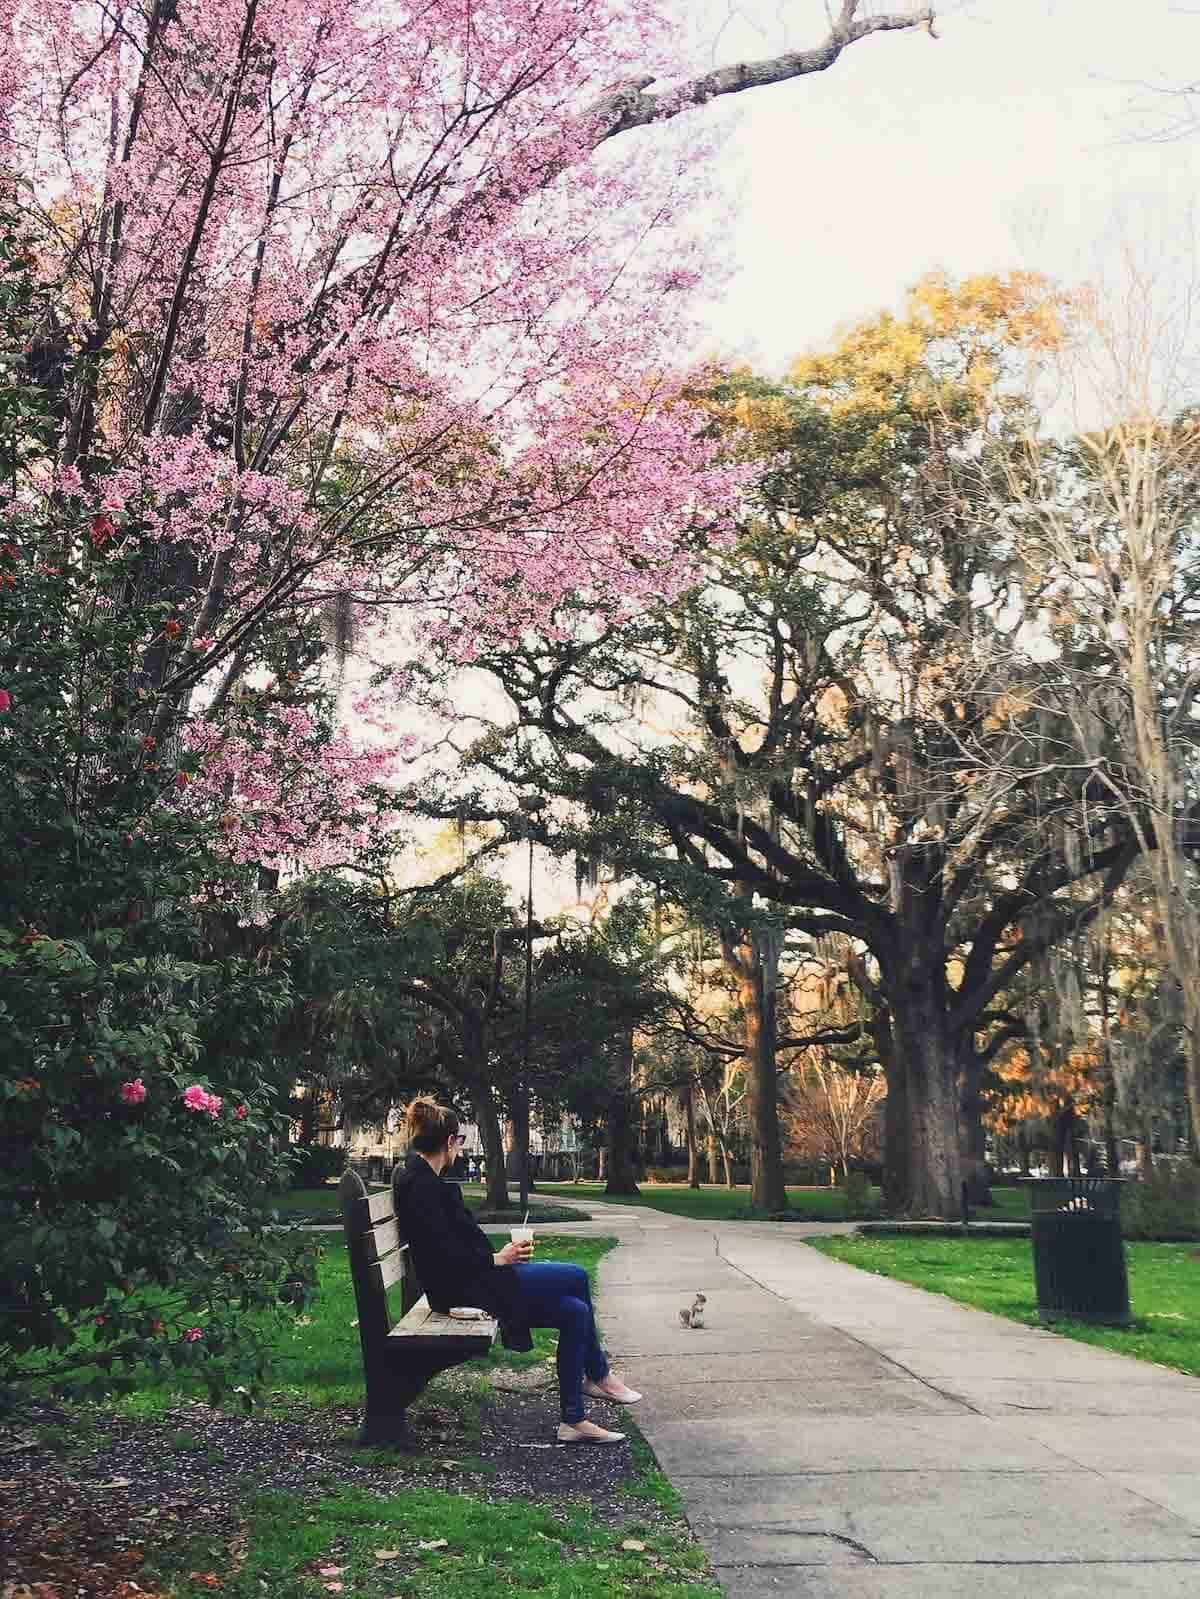 Pink trees and a woman sitting on a bench.